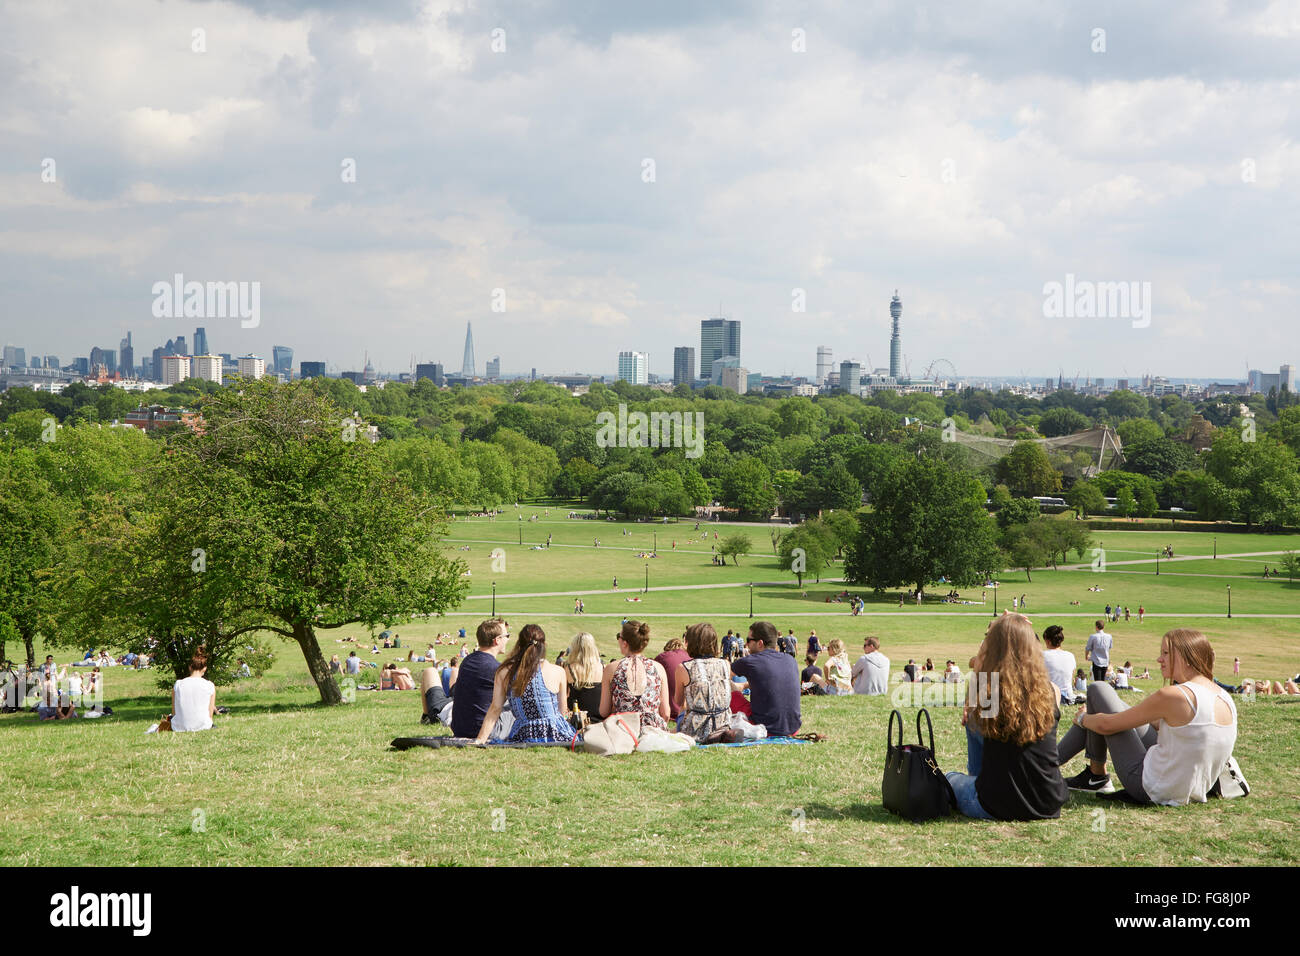 Primrose hill top with London city view and people relaxing in the park in London Stock Photo